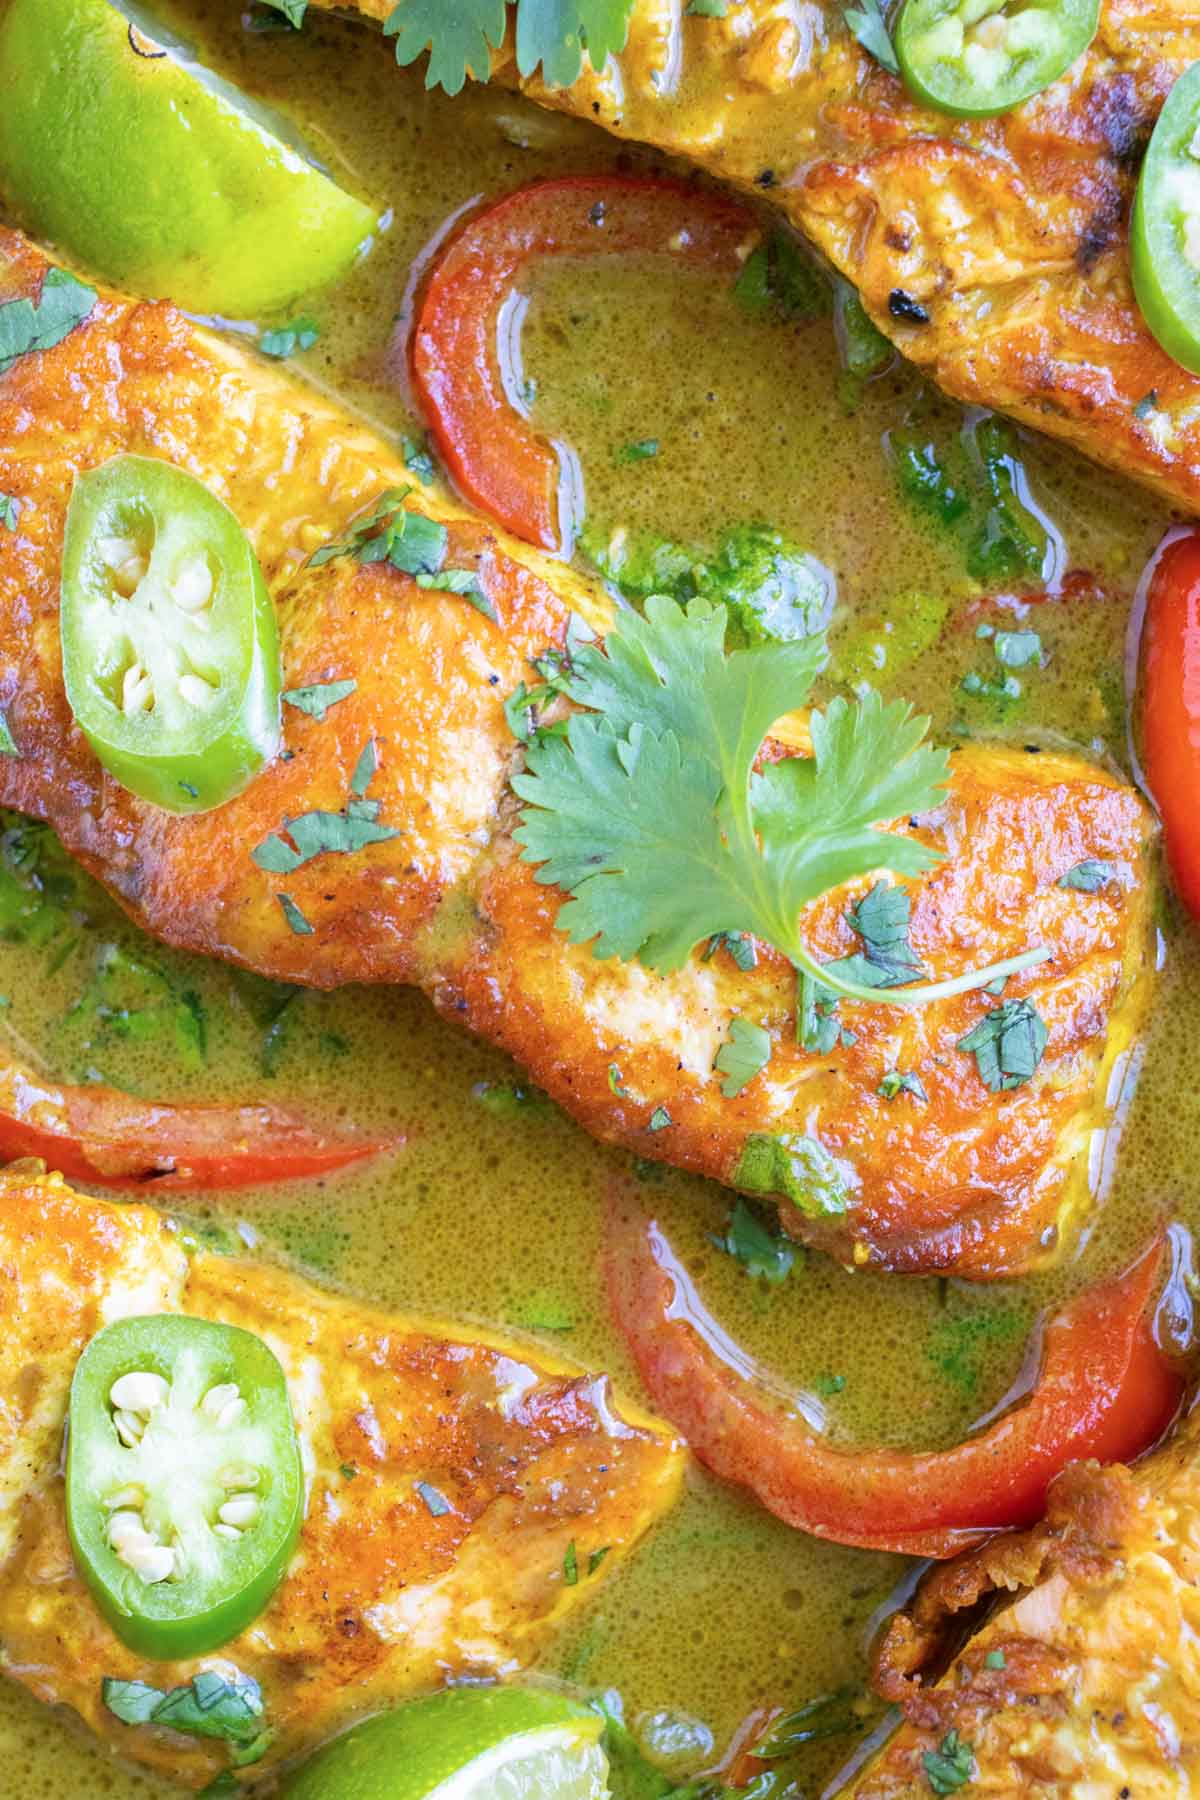 Salmon curry recipe with bell peppers and onion in a coconut milk sauce.